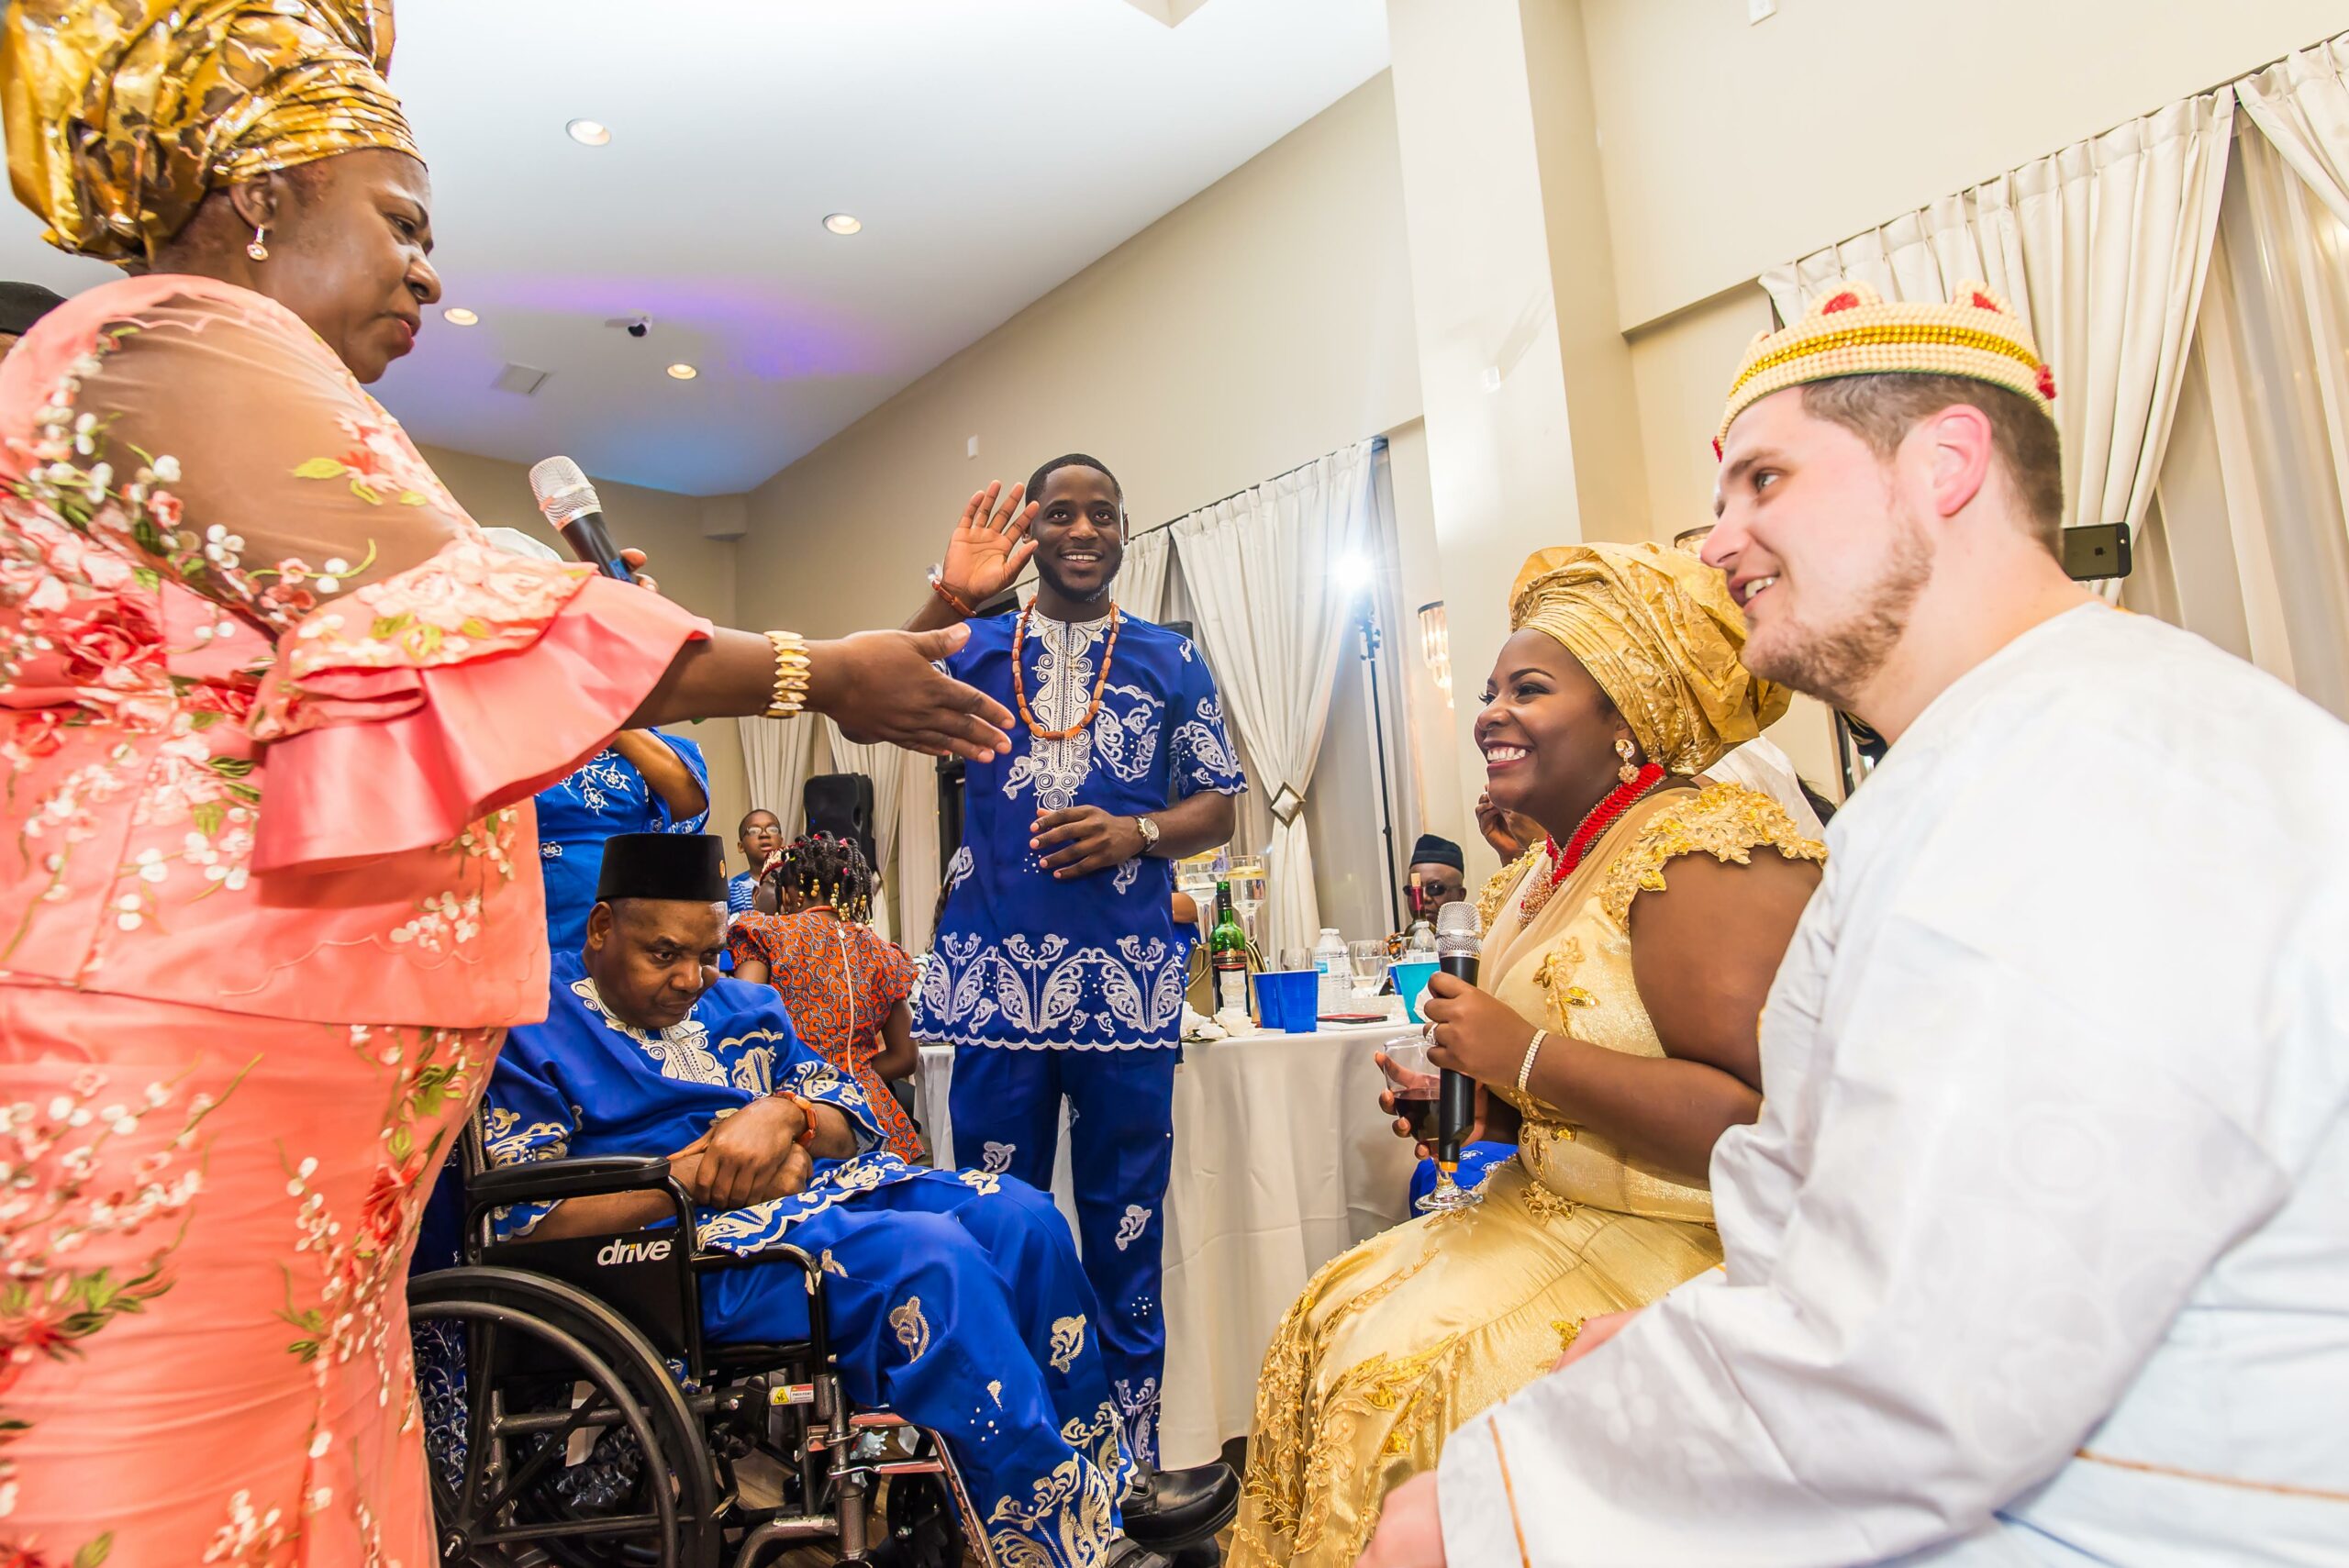 Cultural Traditions Embracing Diversity in Wedding Rituals